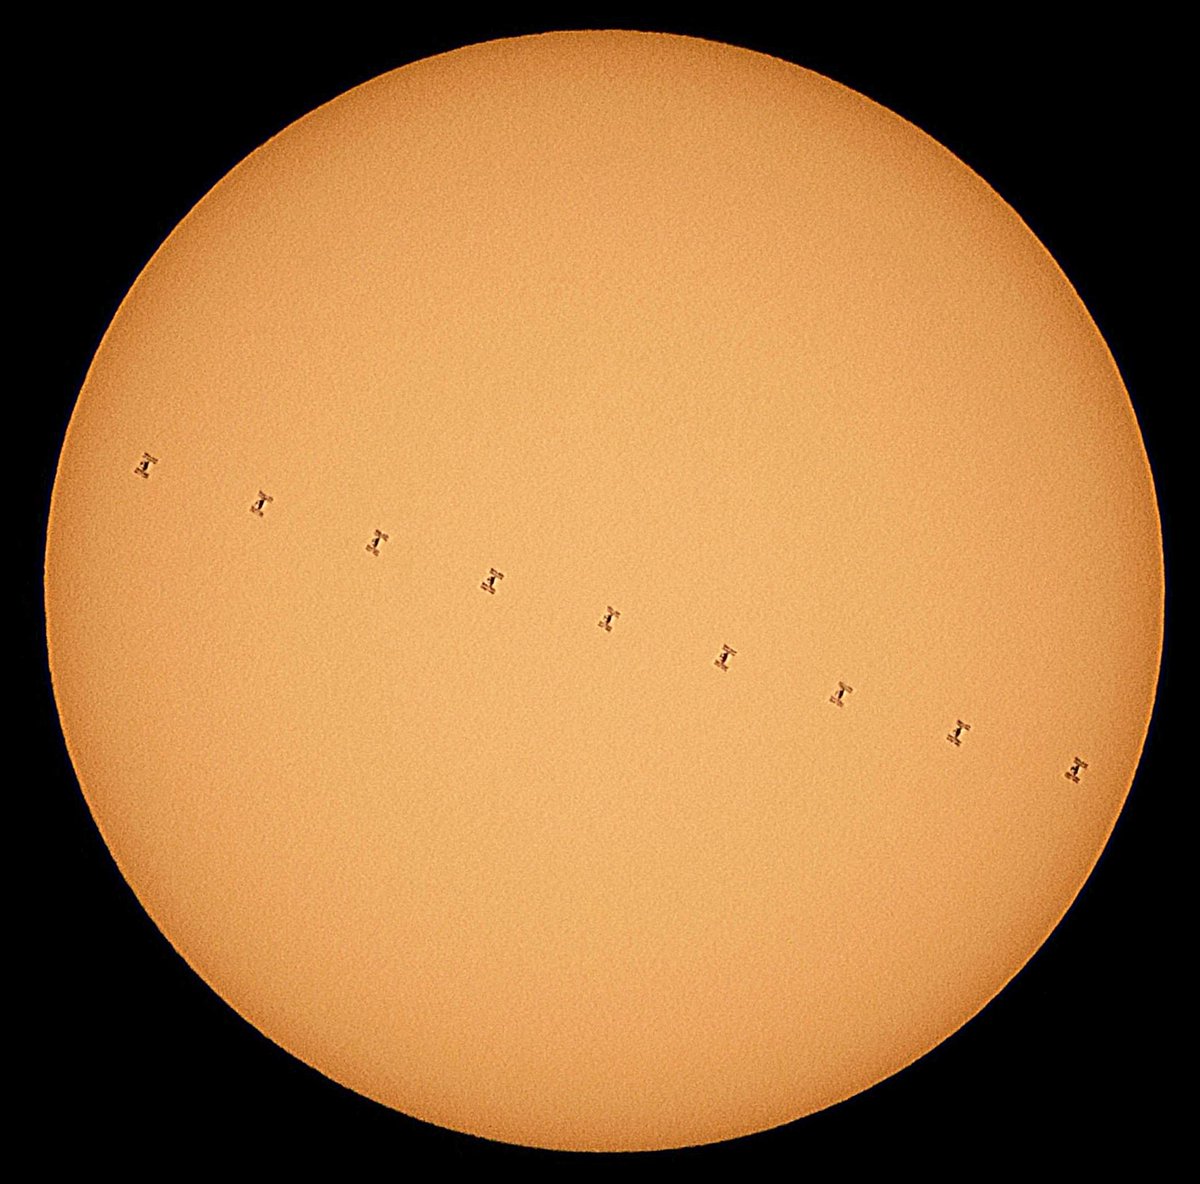 On April 10th, the  #InternationalSpaceStation transited the Sun. My home in London was directly under the epicentre of the flight path. The transit lasted 1.8 secs. From the video in white light I extracted 10 evenly distributed frames which were stacked and processed with colour